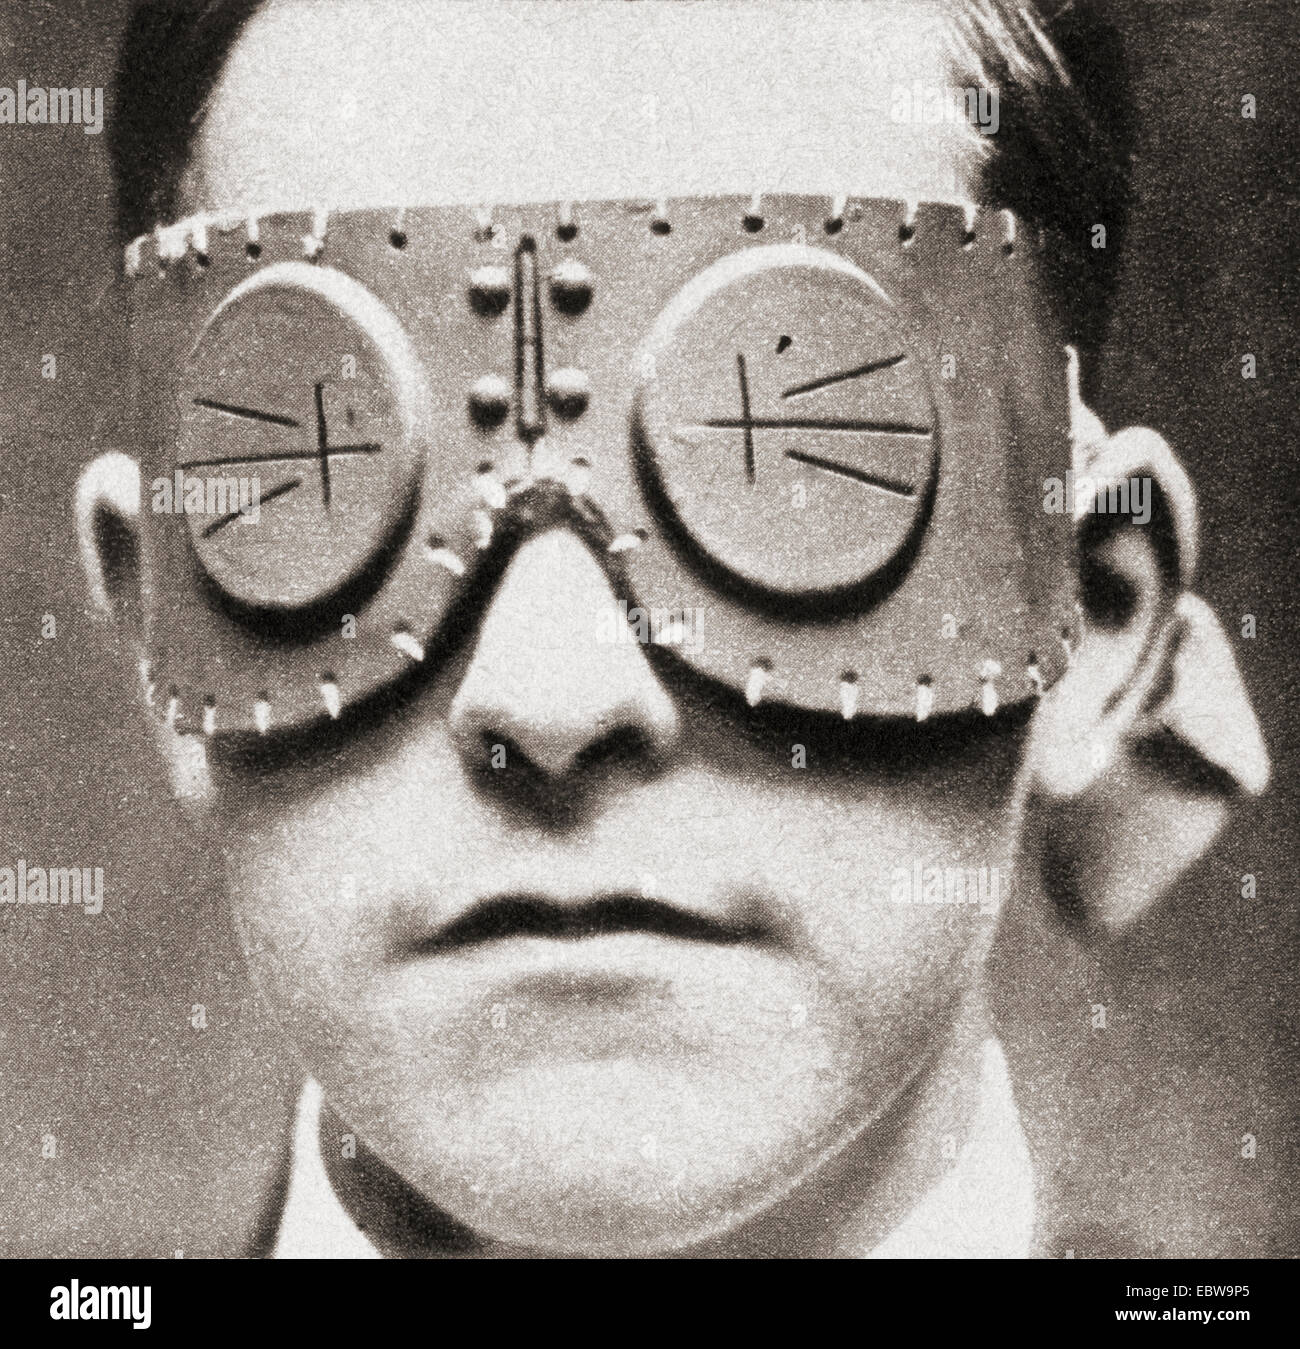 Goggles introduced during World War one, used to protect the forehead, temples and eyes from shell splinters.  Optically arranged slits permitted free vision. Stock Photo